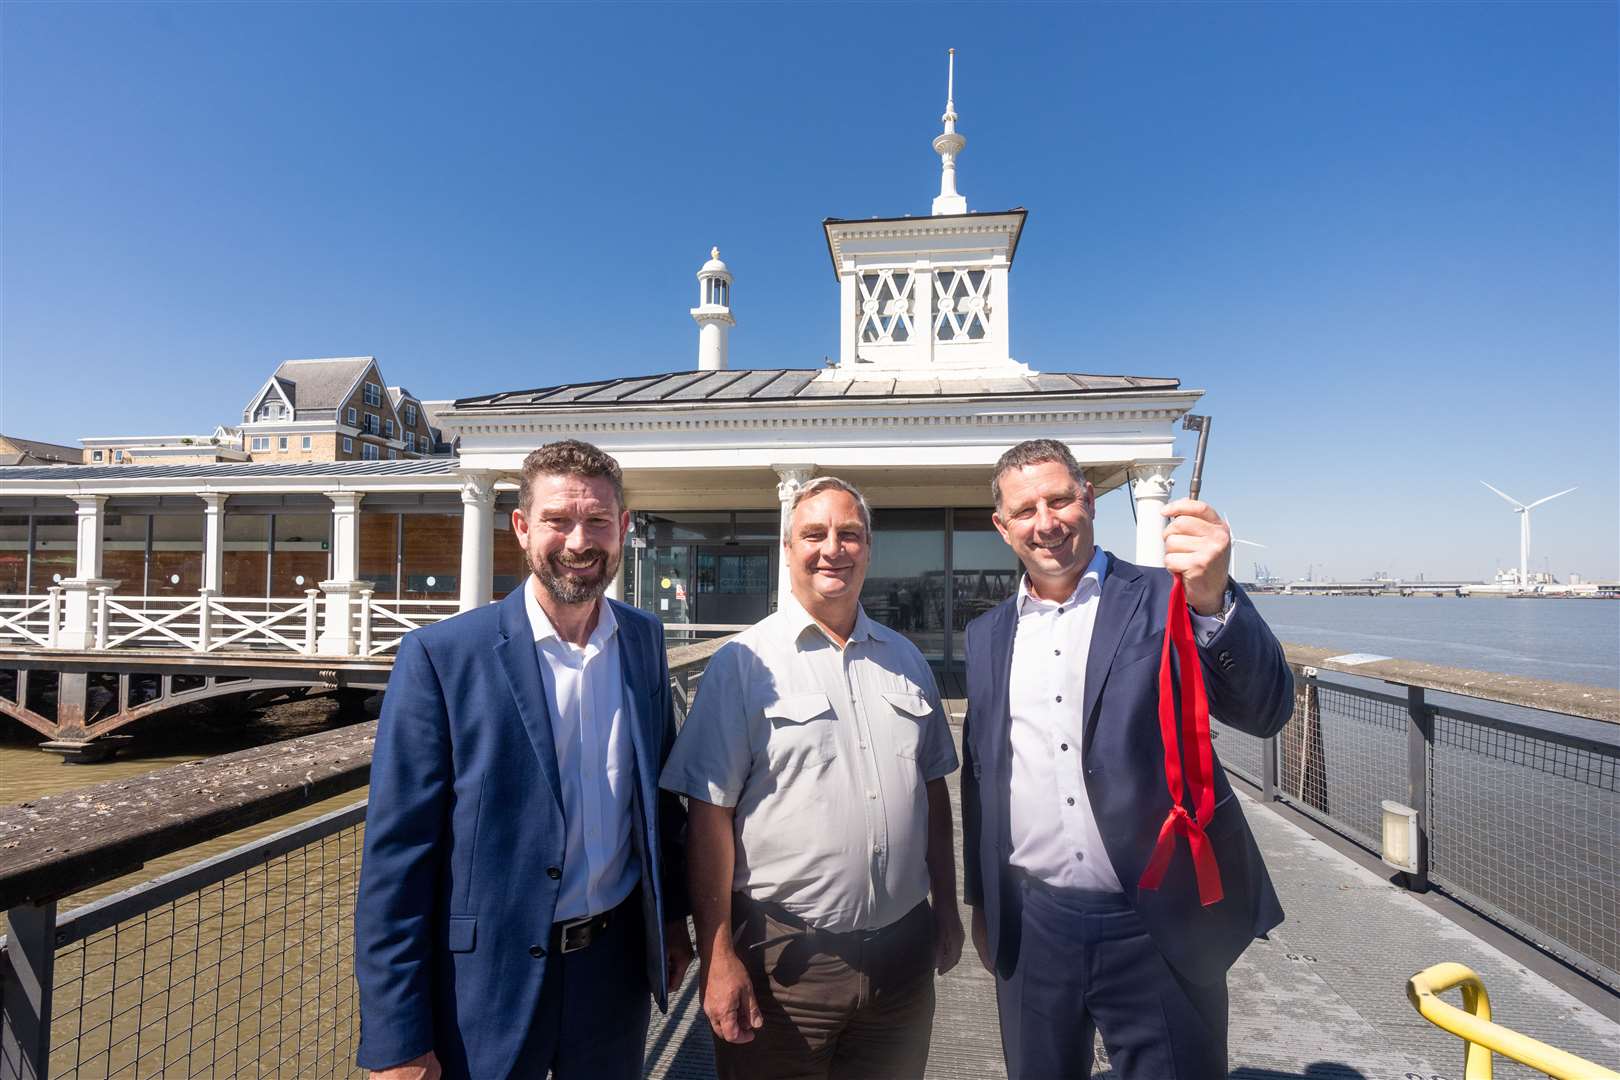 From left: Deputy chief executive of GBC Nick Brown, leader of the council Cllr John Burden, and chief executive of Uber Boat Sean Collins. Picture: Thames Clippers